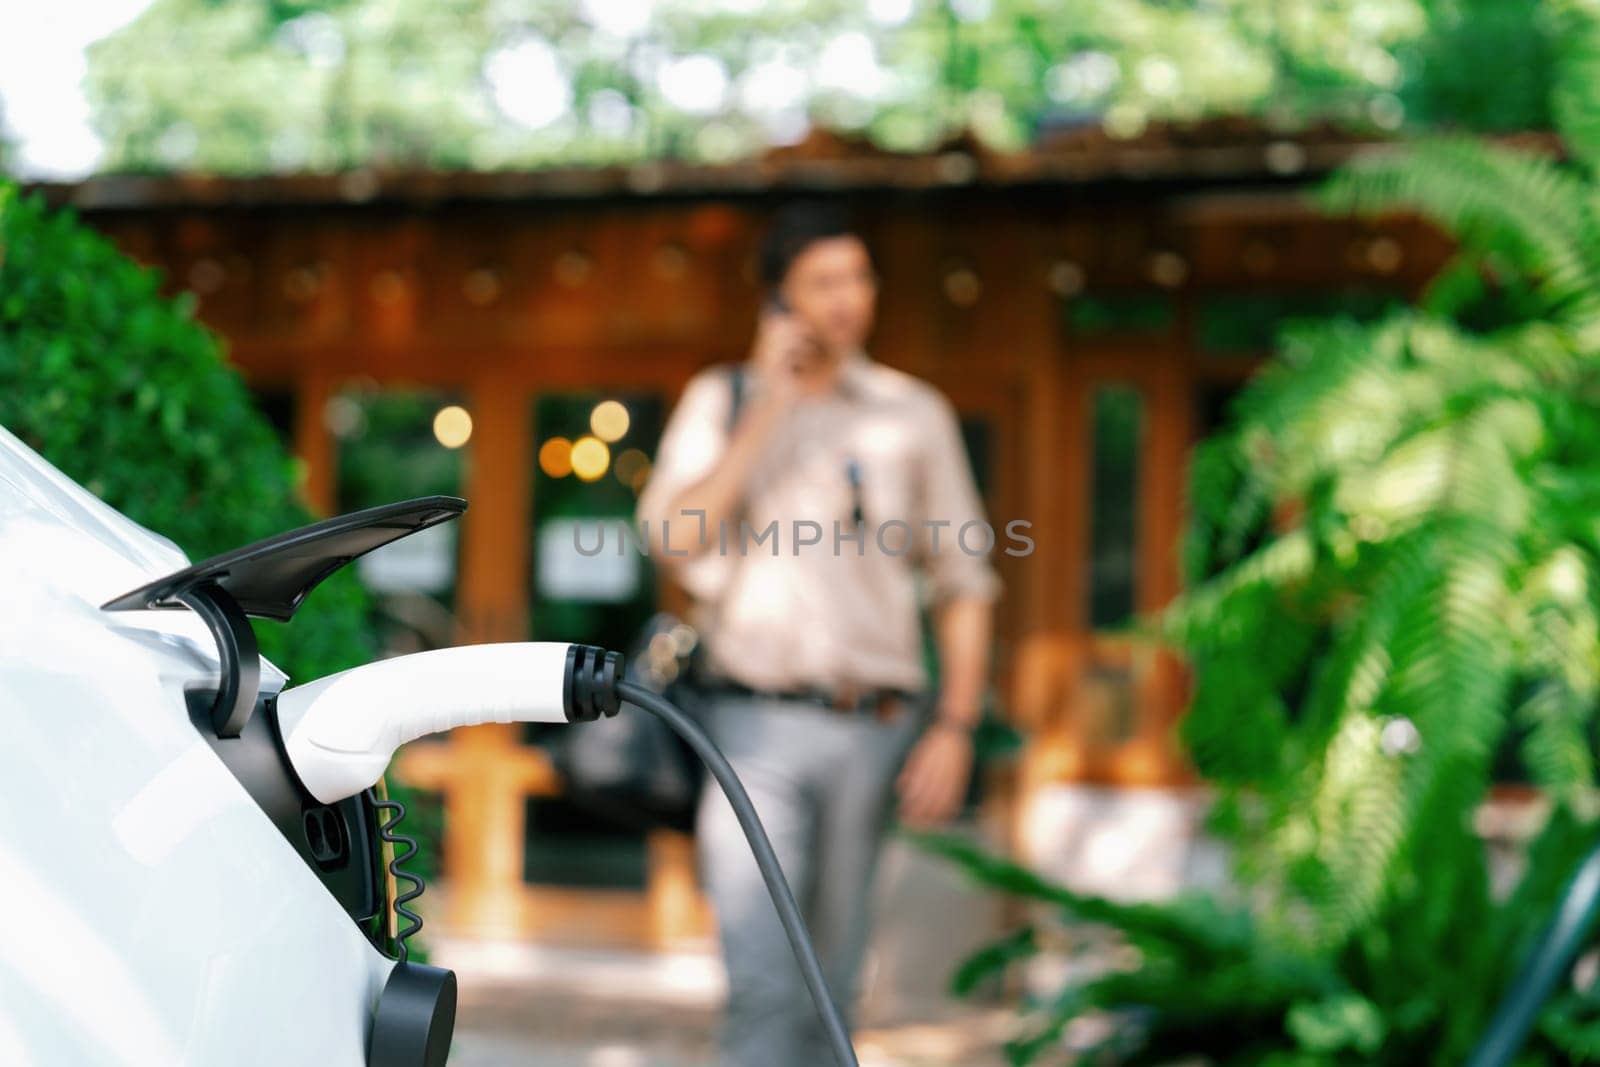 Focused EV electric car recharging at outdoor coffee cafe in springtime garden with blur background of eco friendly man, green city sustainability and environmental friendly EV vehicle. Expedient